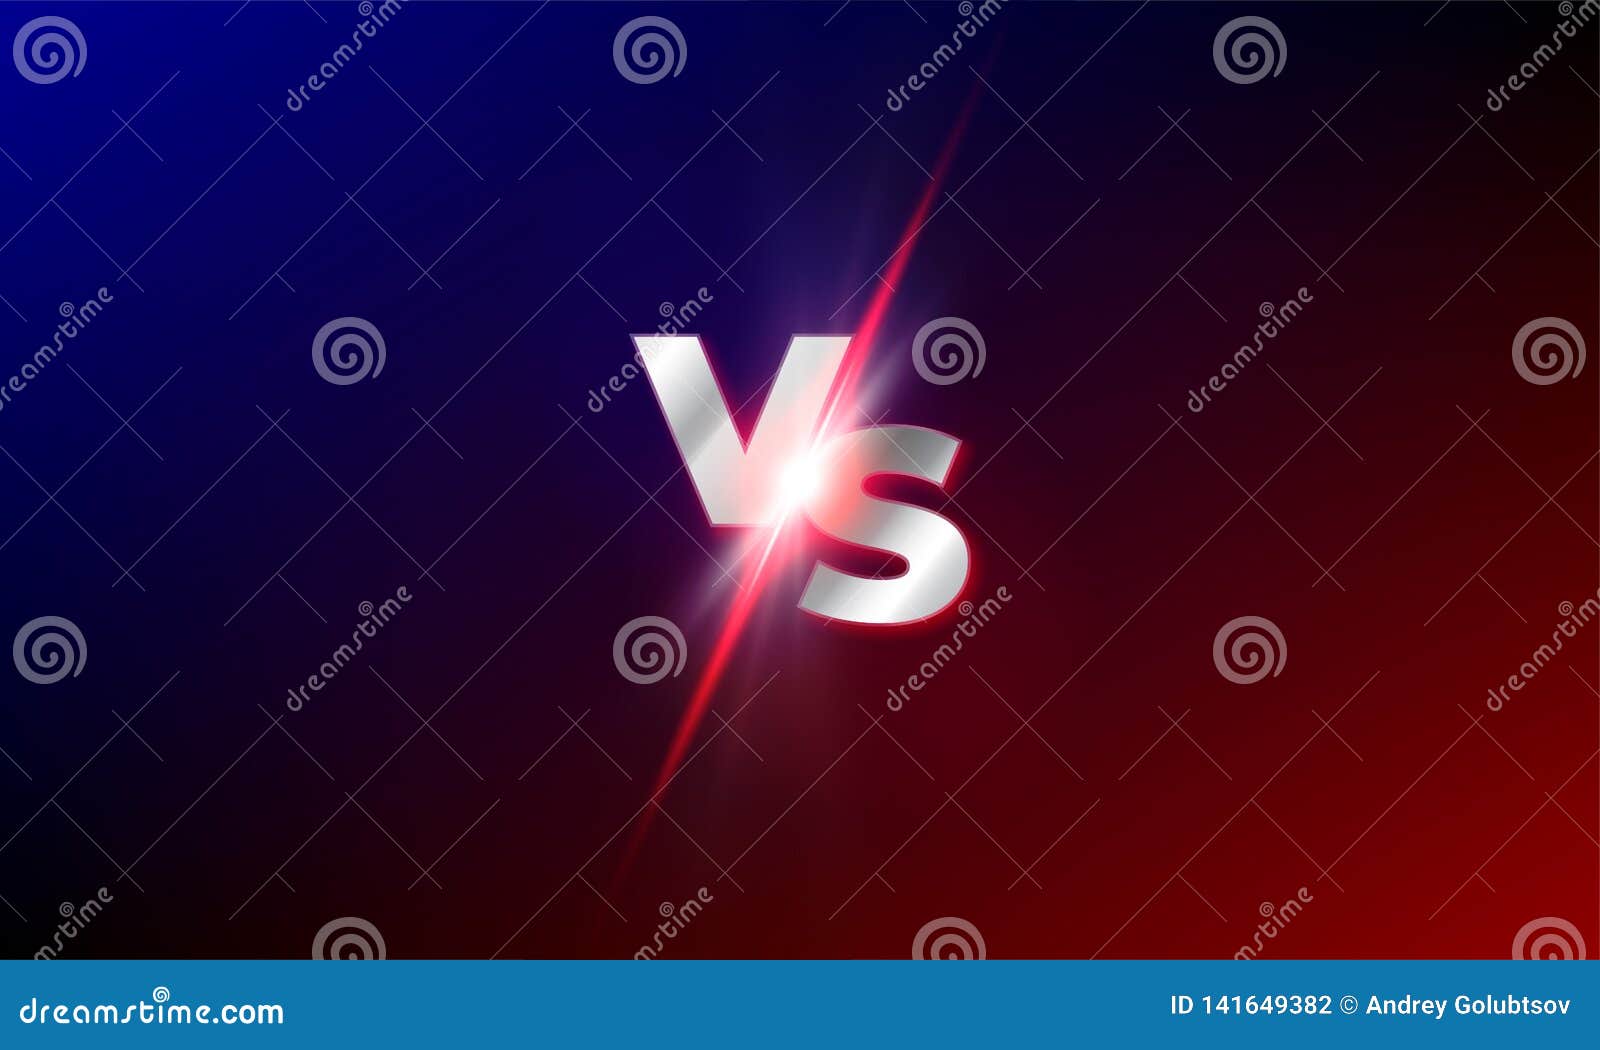 vs versus  background. red and blue mma fight competition vs light blast sparkle